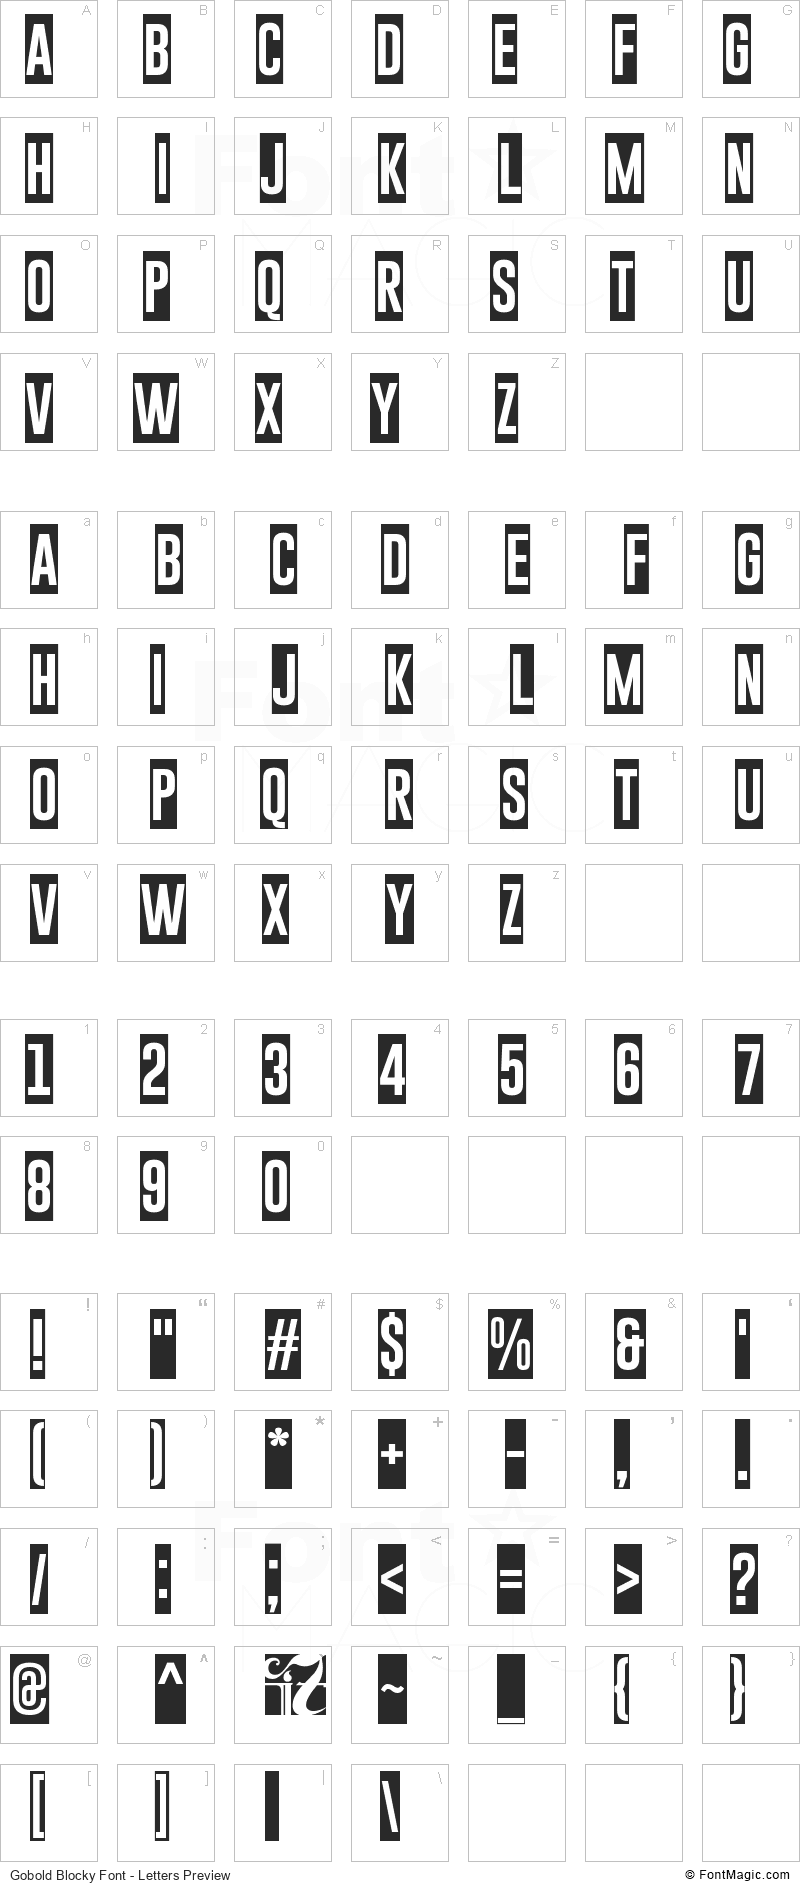 Gobold Blocky Font - All Latters Preview Chart